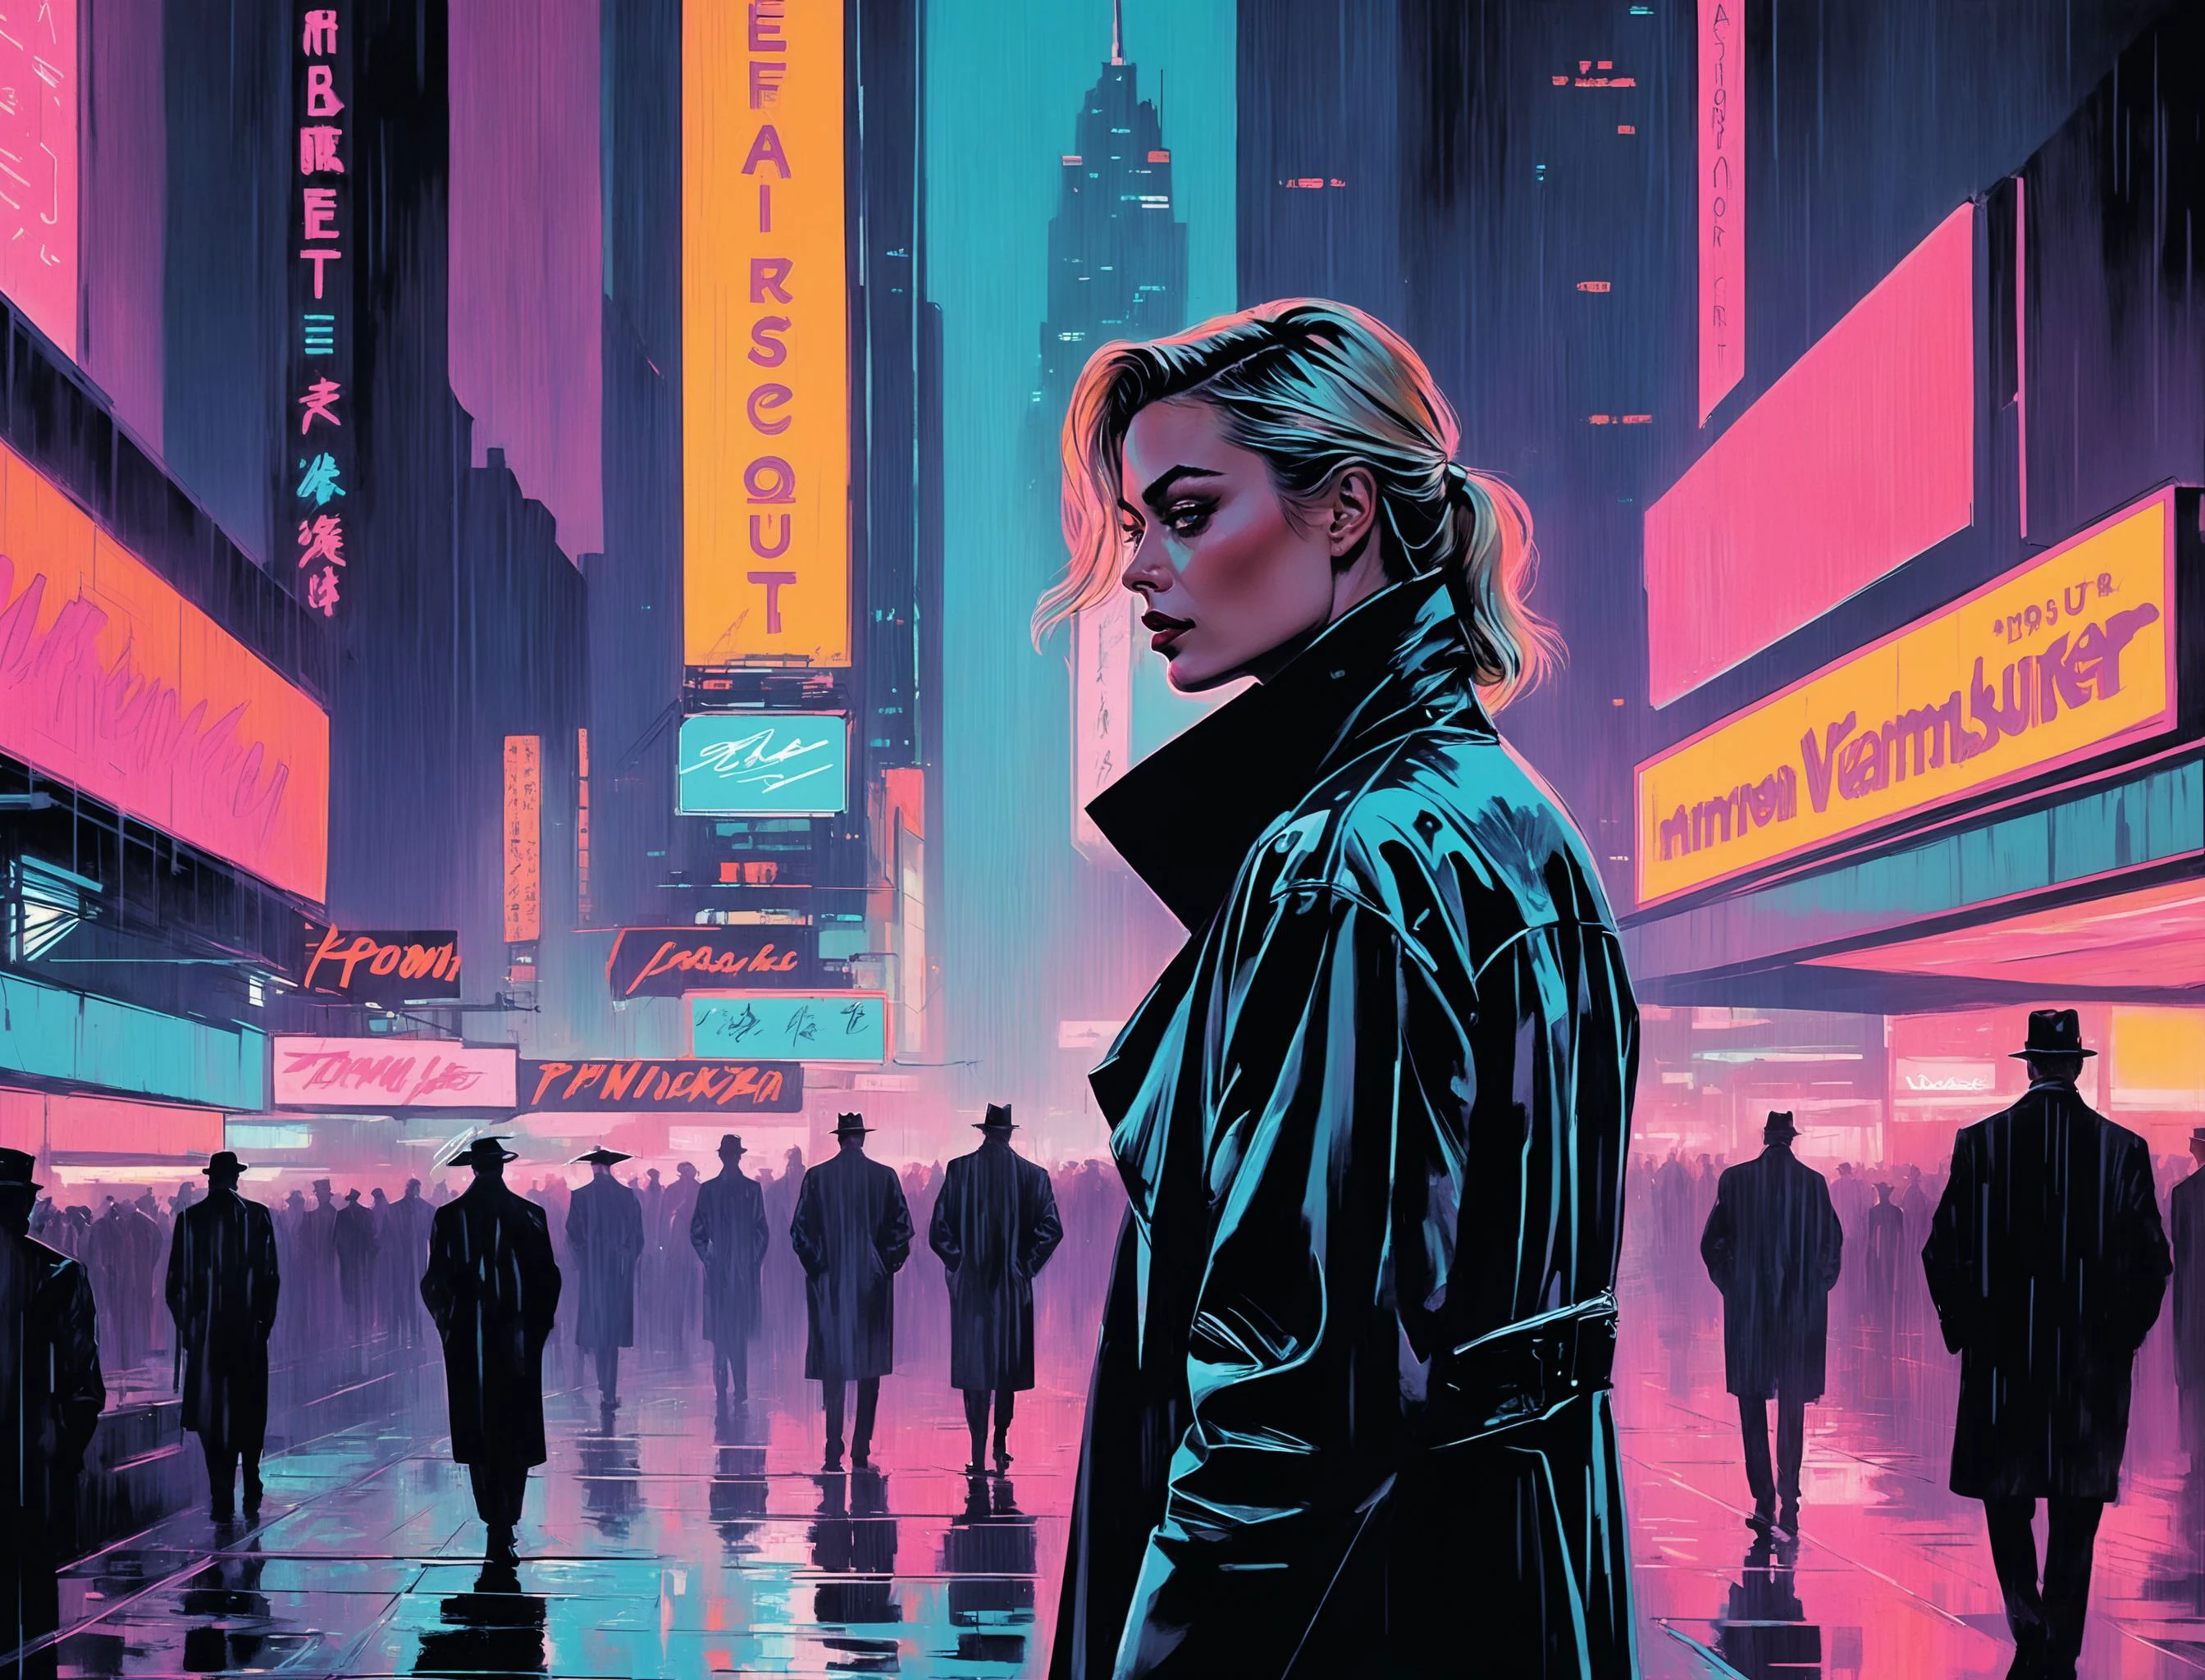 (Margot Robbie), nighttime, cyberpunk city, dark, raining, neon lights , (Syd Mead Style,pastel colors ), cyberpunk, synthwave, 1980s, futurism, brutalism, neuromancer, cinematic photo in California, art by Antoine Le Nain, art by Antoine Verney-Carron,((art by Ross Bleckner)),intimate close eye contact, intense detailed eyes,,art by Jakub Rozalski, 1920+ Poland,art by Adrian Tomine